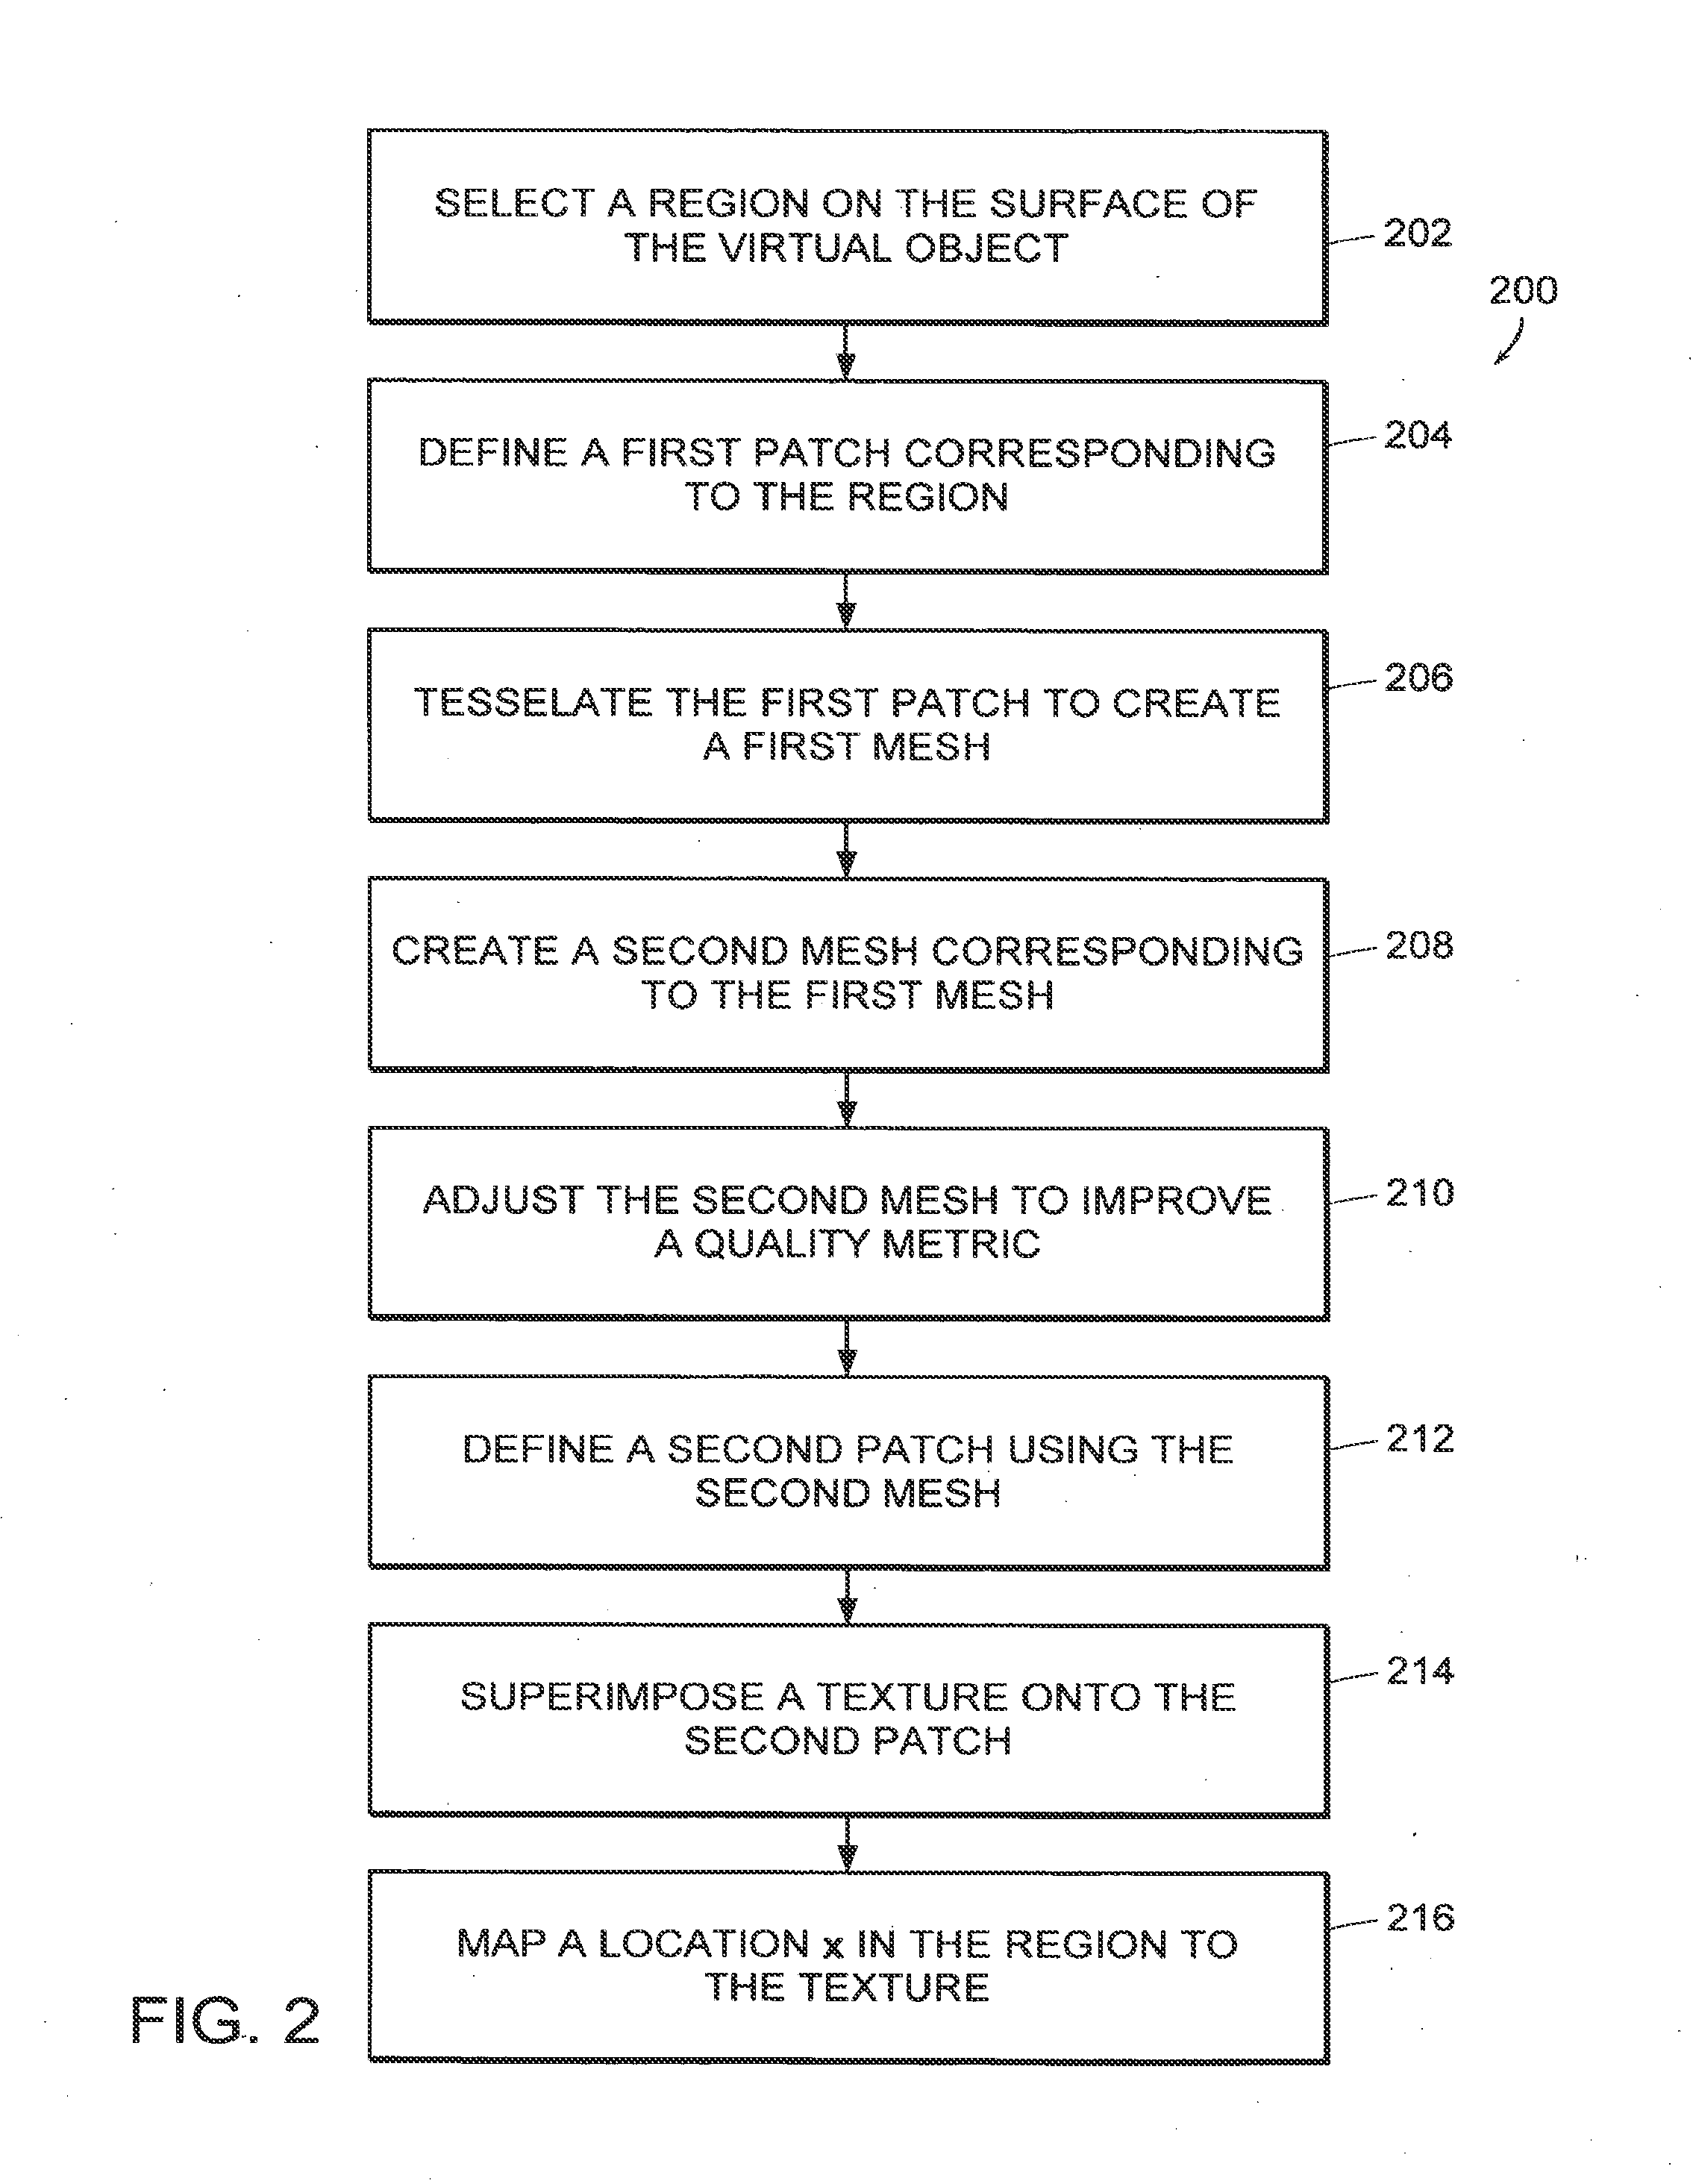 Apparatus and methods for adjusting a texture wrapping onto the surface of a virtual object